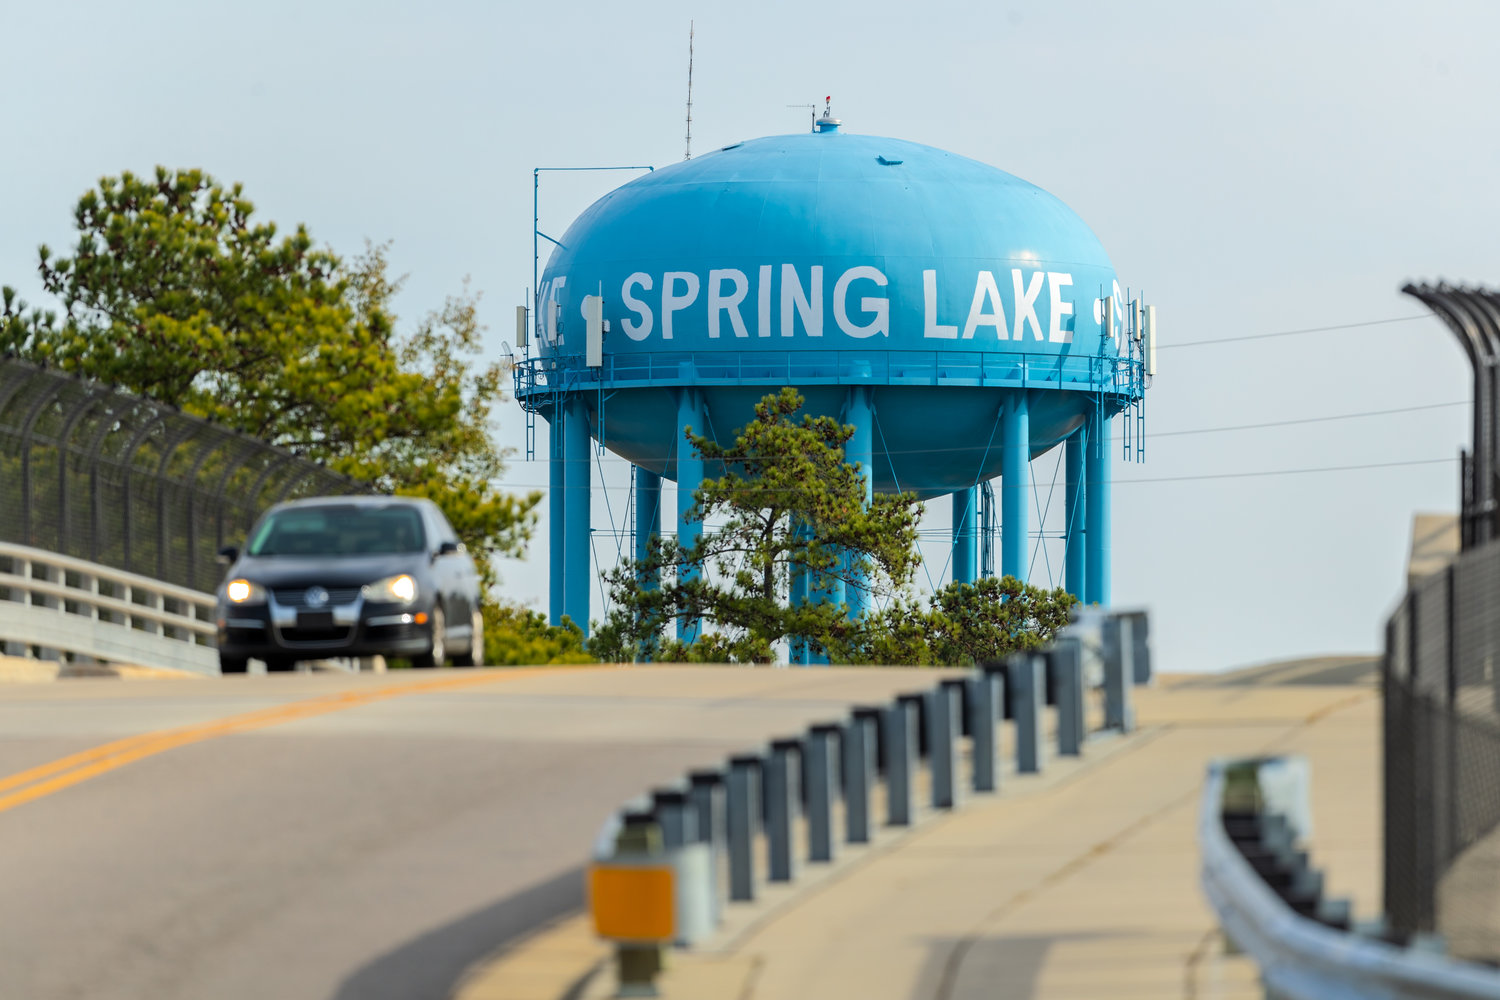 The Spring Lake Board of Aldermen will meet at 6 p.m. Monday at the Spring Lake Town Hall.